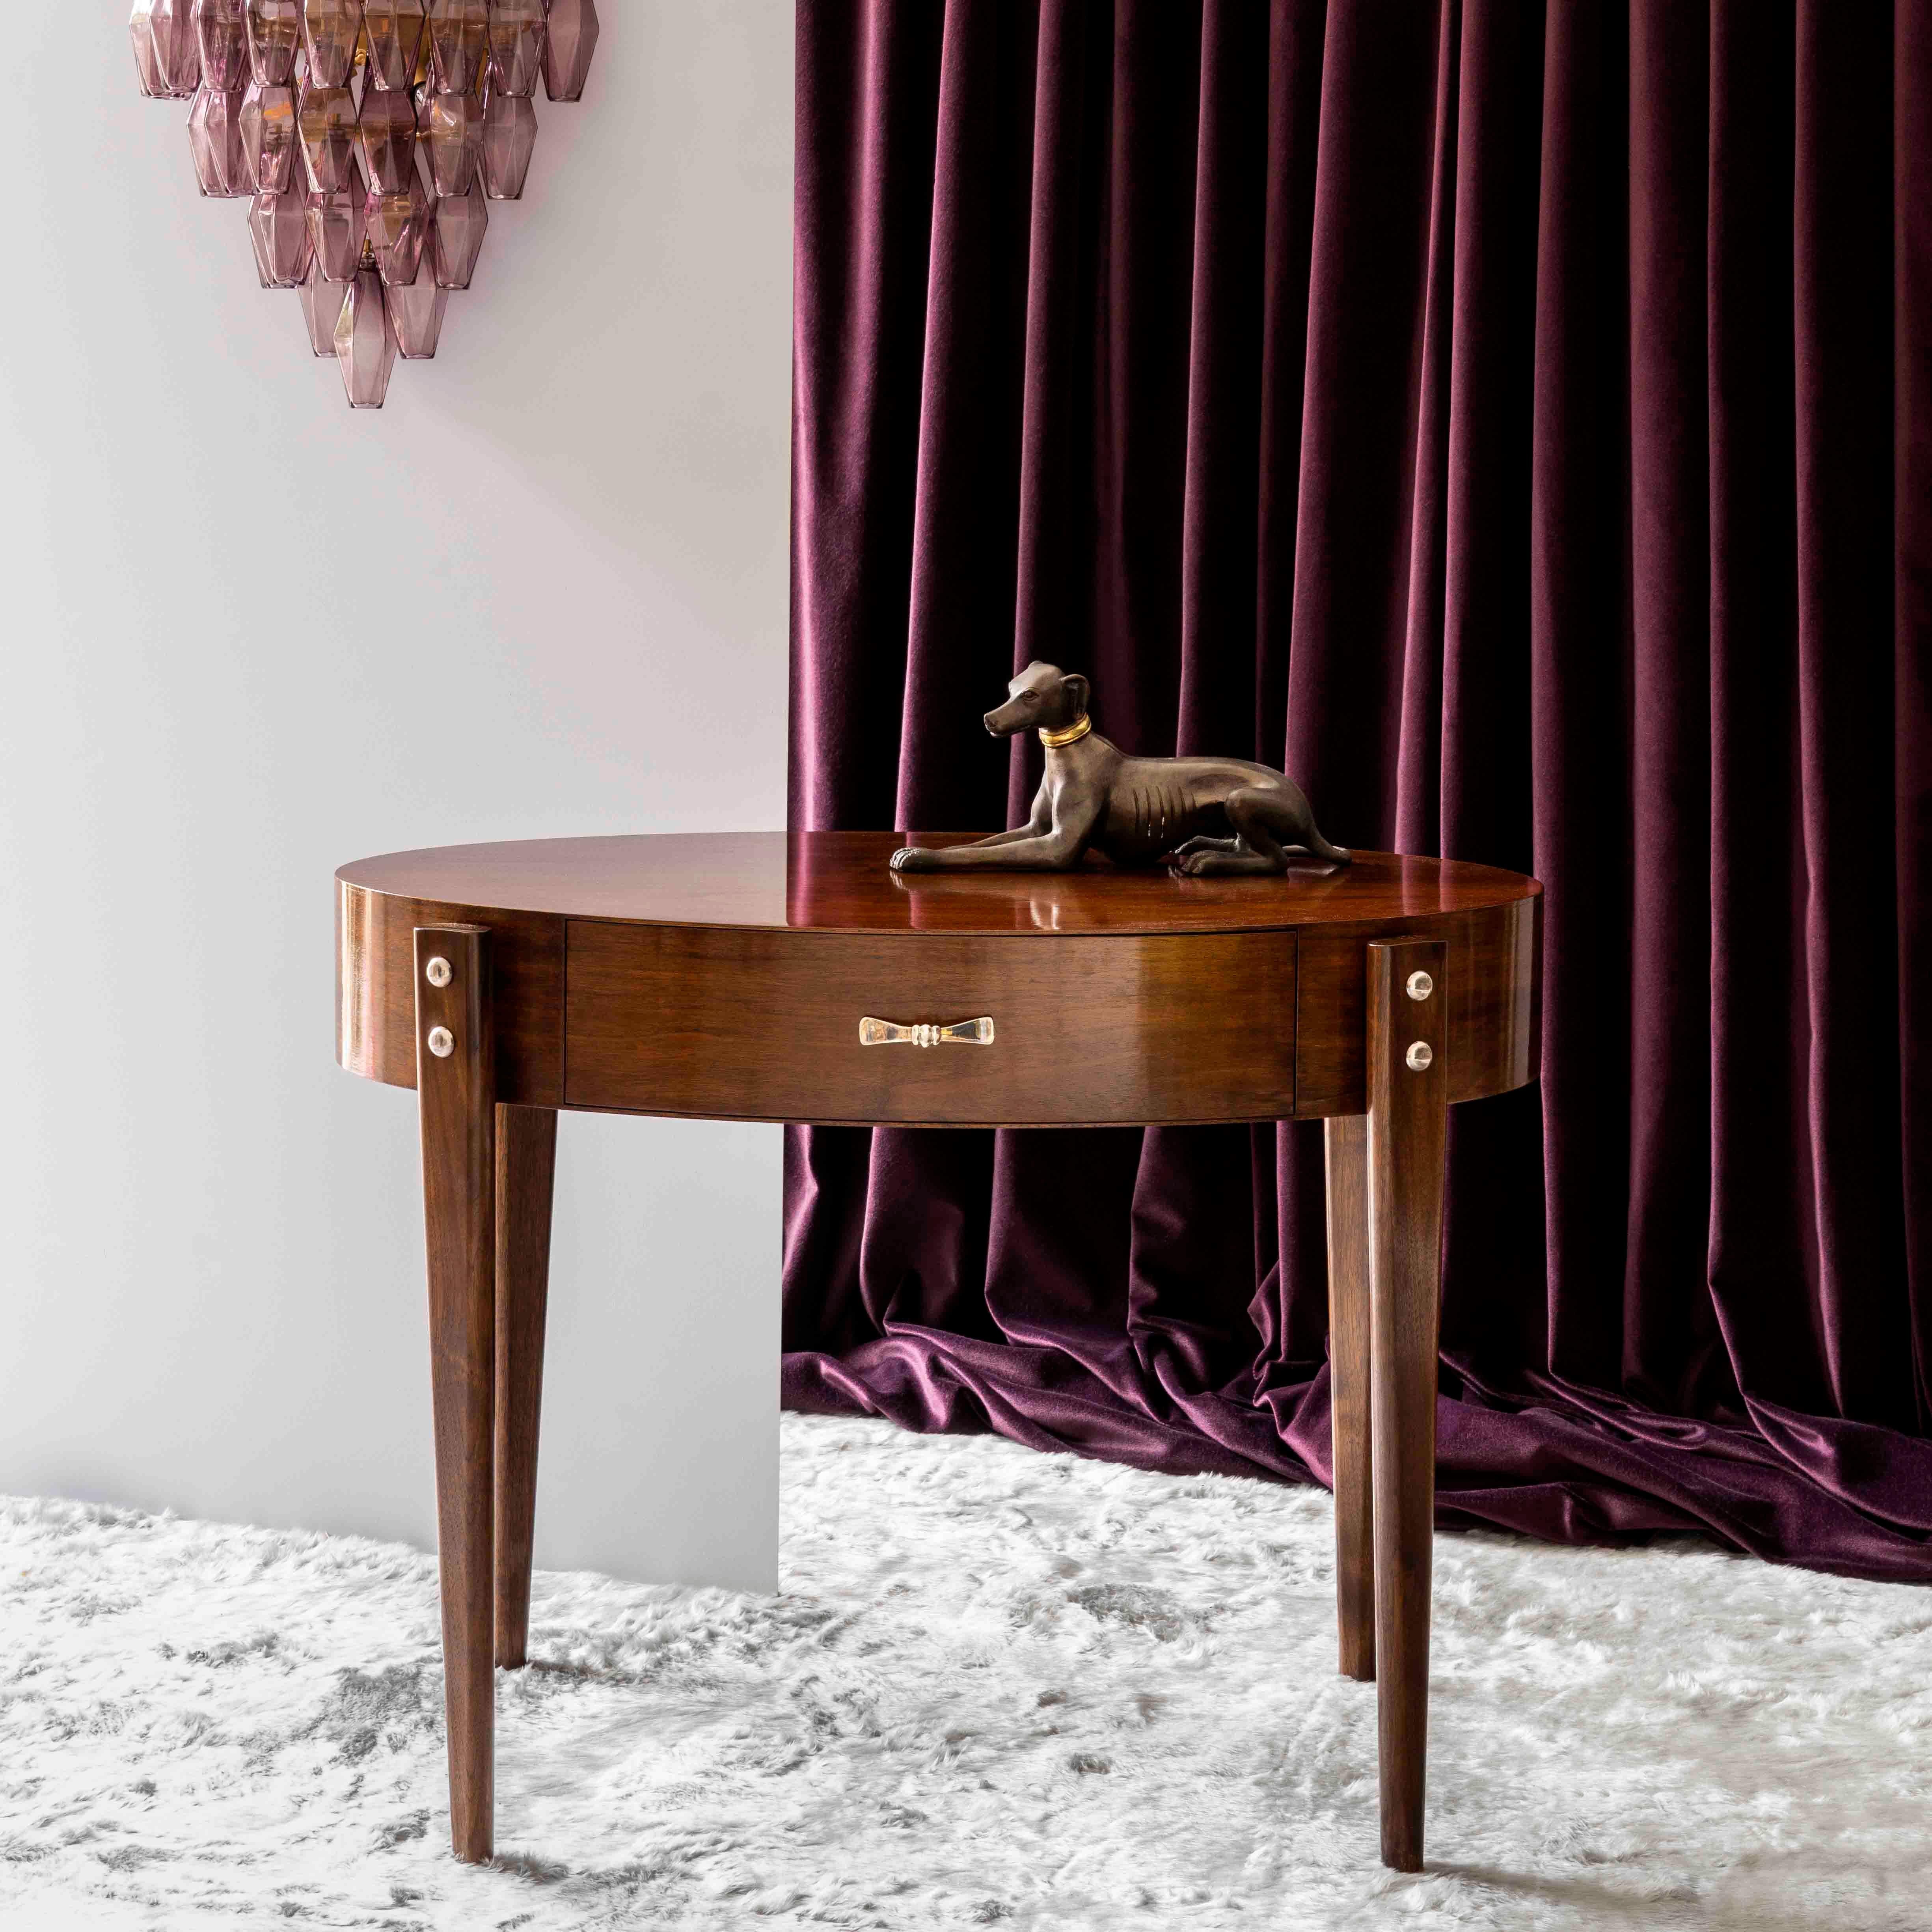 English Daphne Desk or Table - Bespoke - shown in Walnut, Antique Silver Handles For Sale